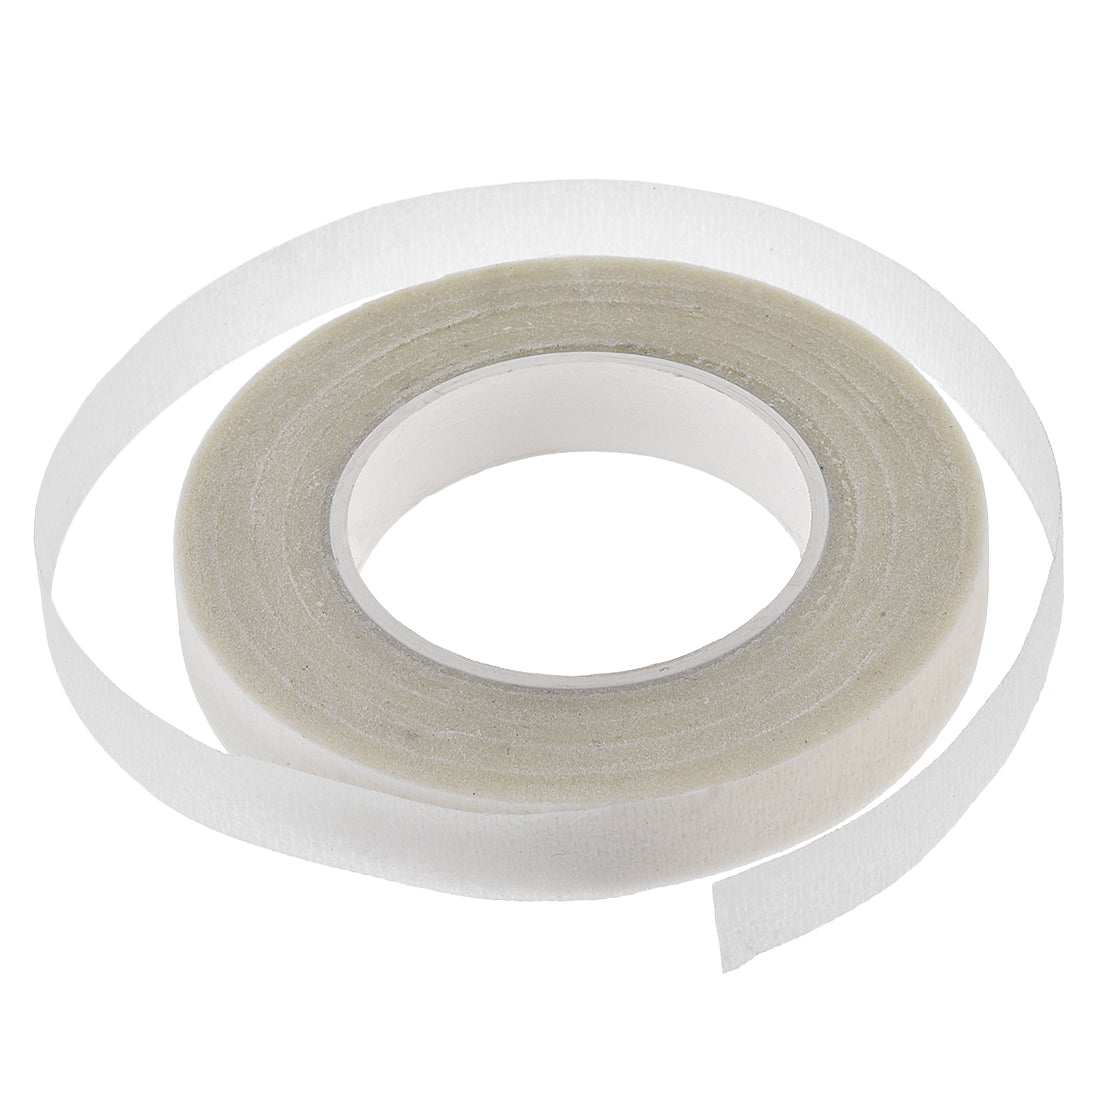 uxcell Uxcell 1Roll 1/2"x30Yard White Floral Tape Flower Adhesives Floral Arrangement Kit